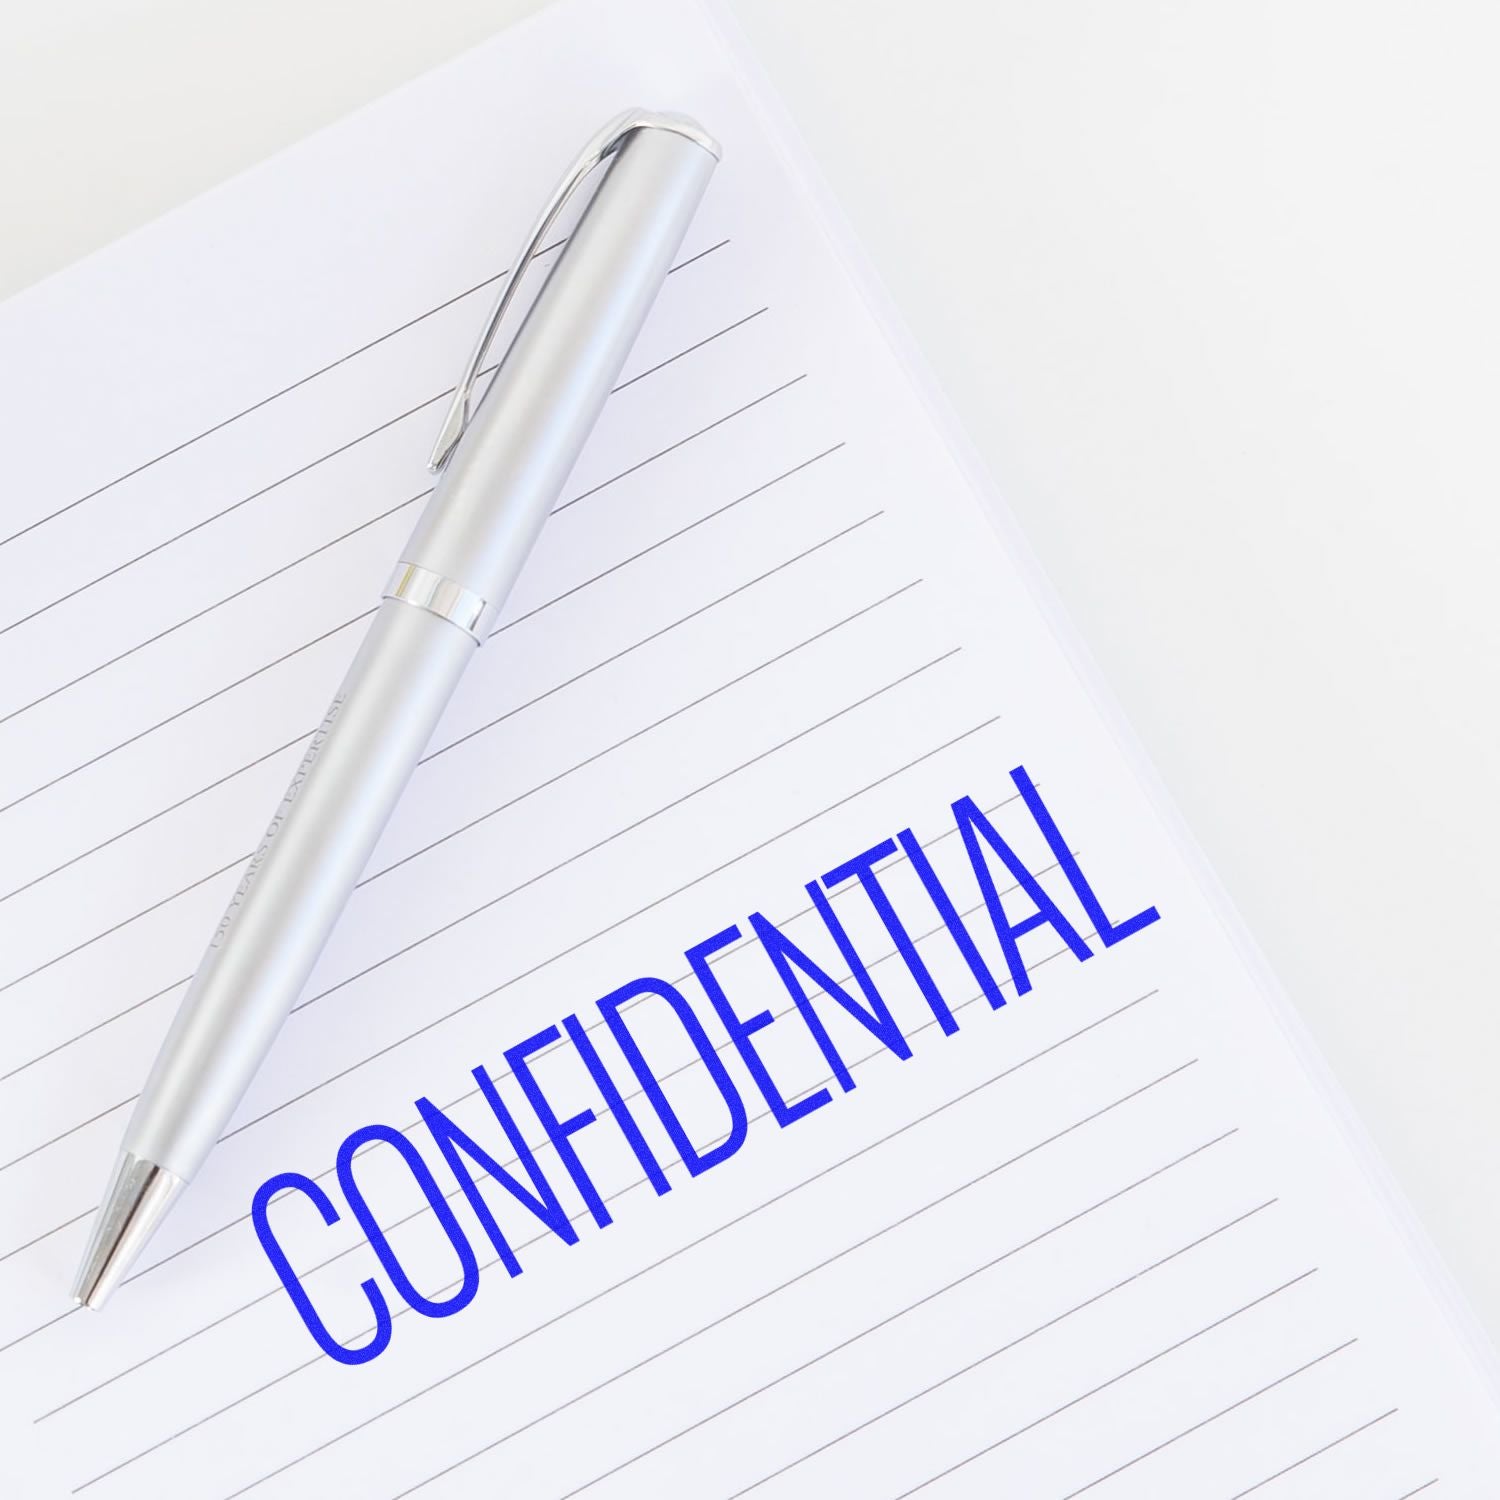 Large Narrow Font Confidential Rubber Stamp In Use Photo